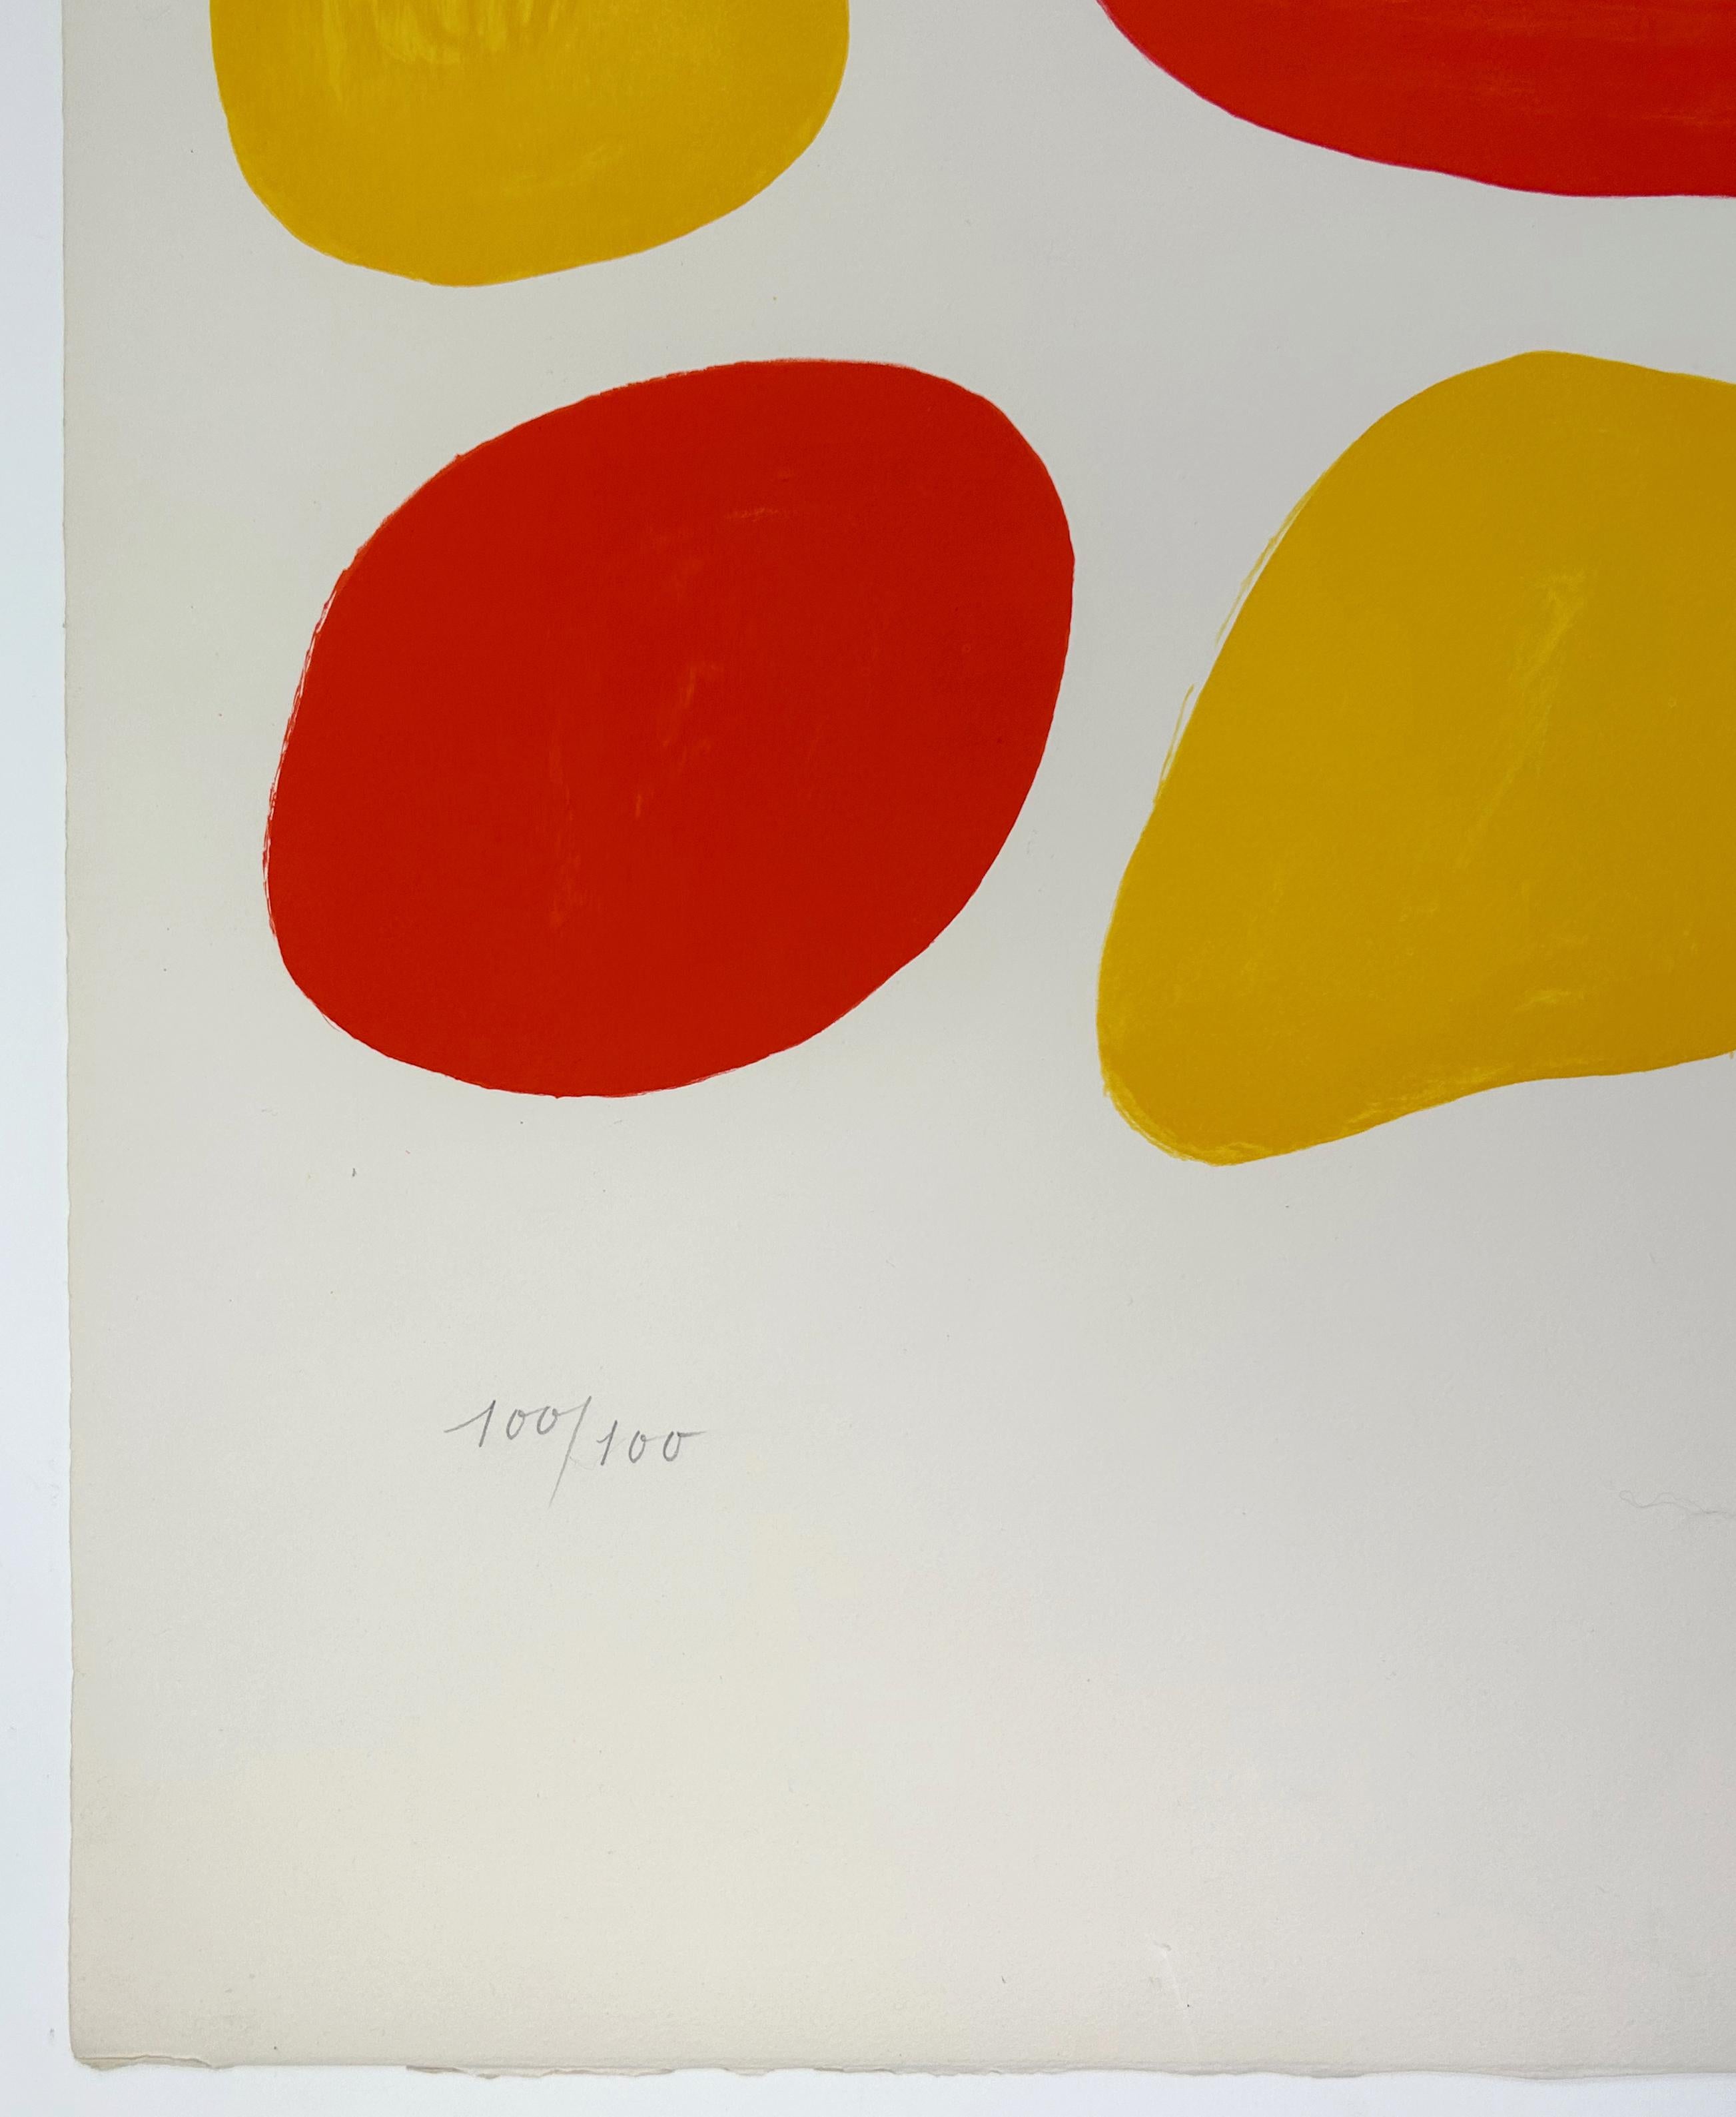 Alexander Calder
Homage to Ben Shahn
Color lithograph on Arches, 1971. 
995x625 mm; 39 1/2x24 1/2 inches (sheet), full margins. 
Signed and numbered 100/100 in pencil, lower margin. 
Printed by Mourlot, Paris. 
Published by Mourlot Atelier, New